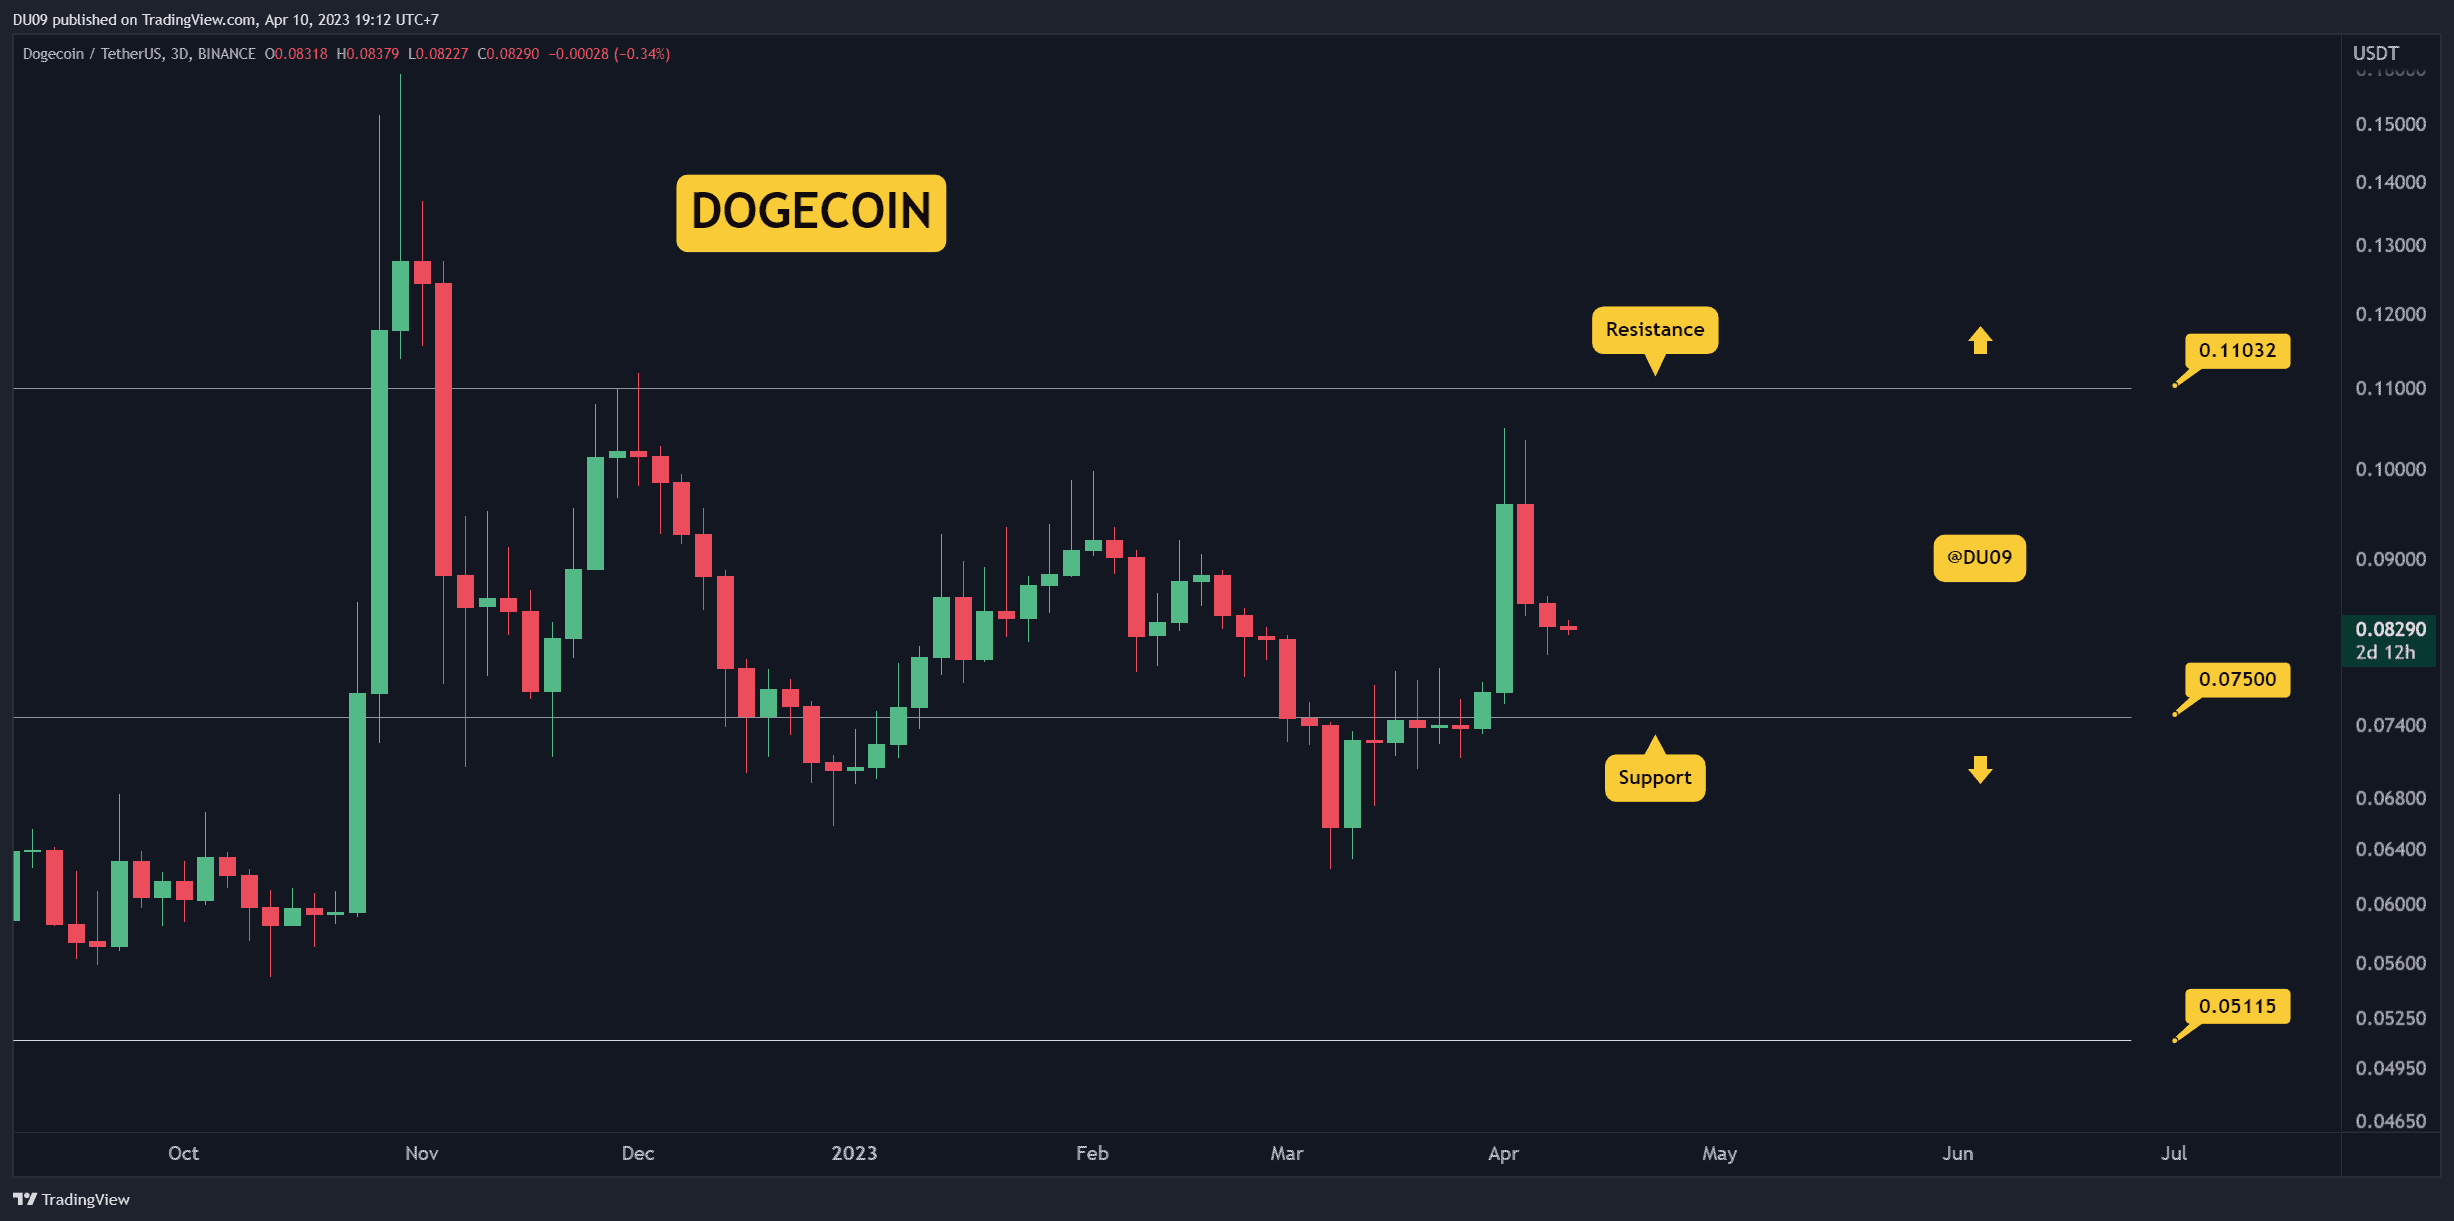 Doge-crashes-20%-in-three-days,-how-low-can-it-go?-(dogecoin-price-analysis)